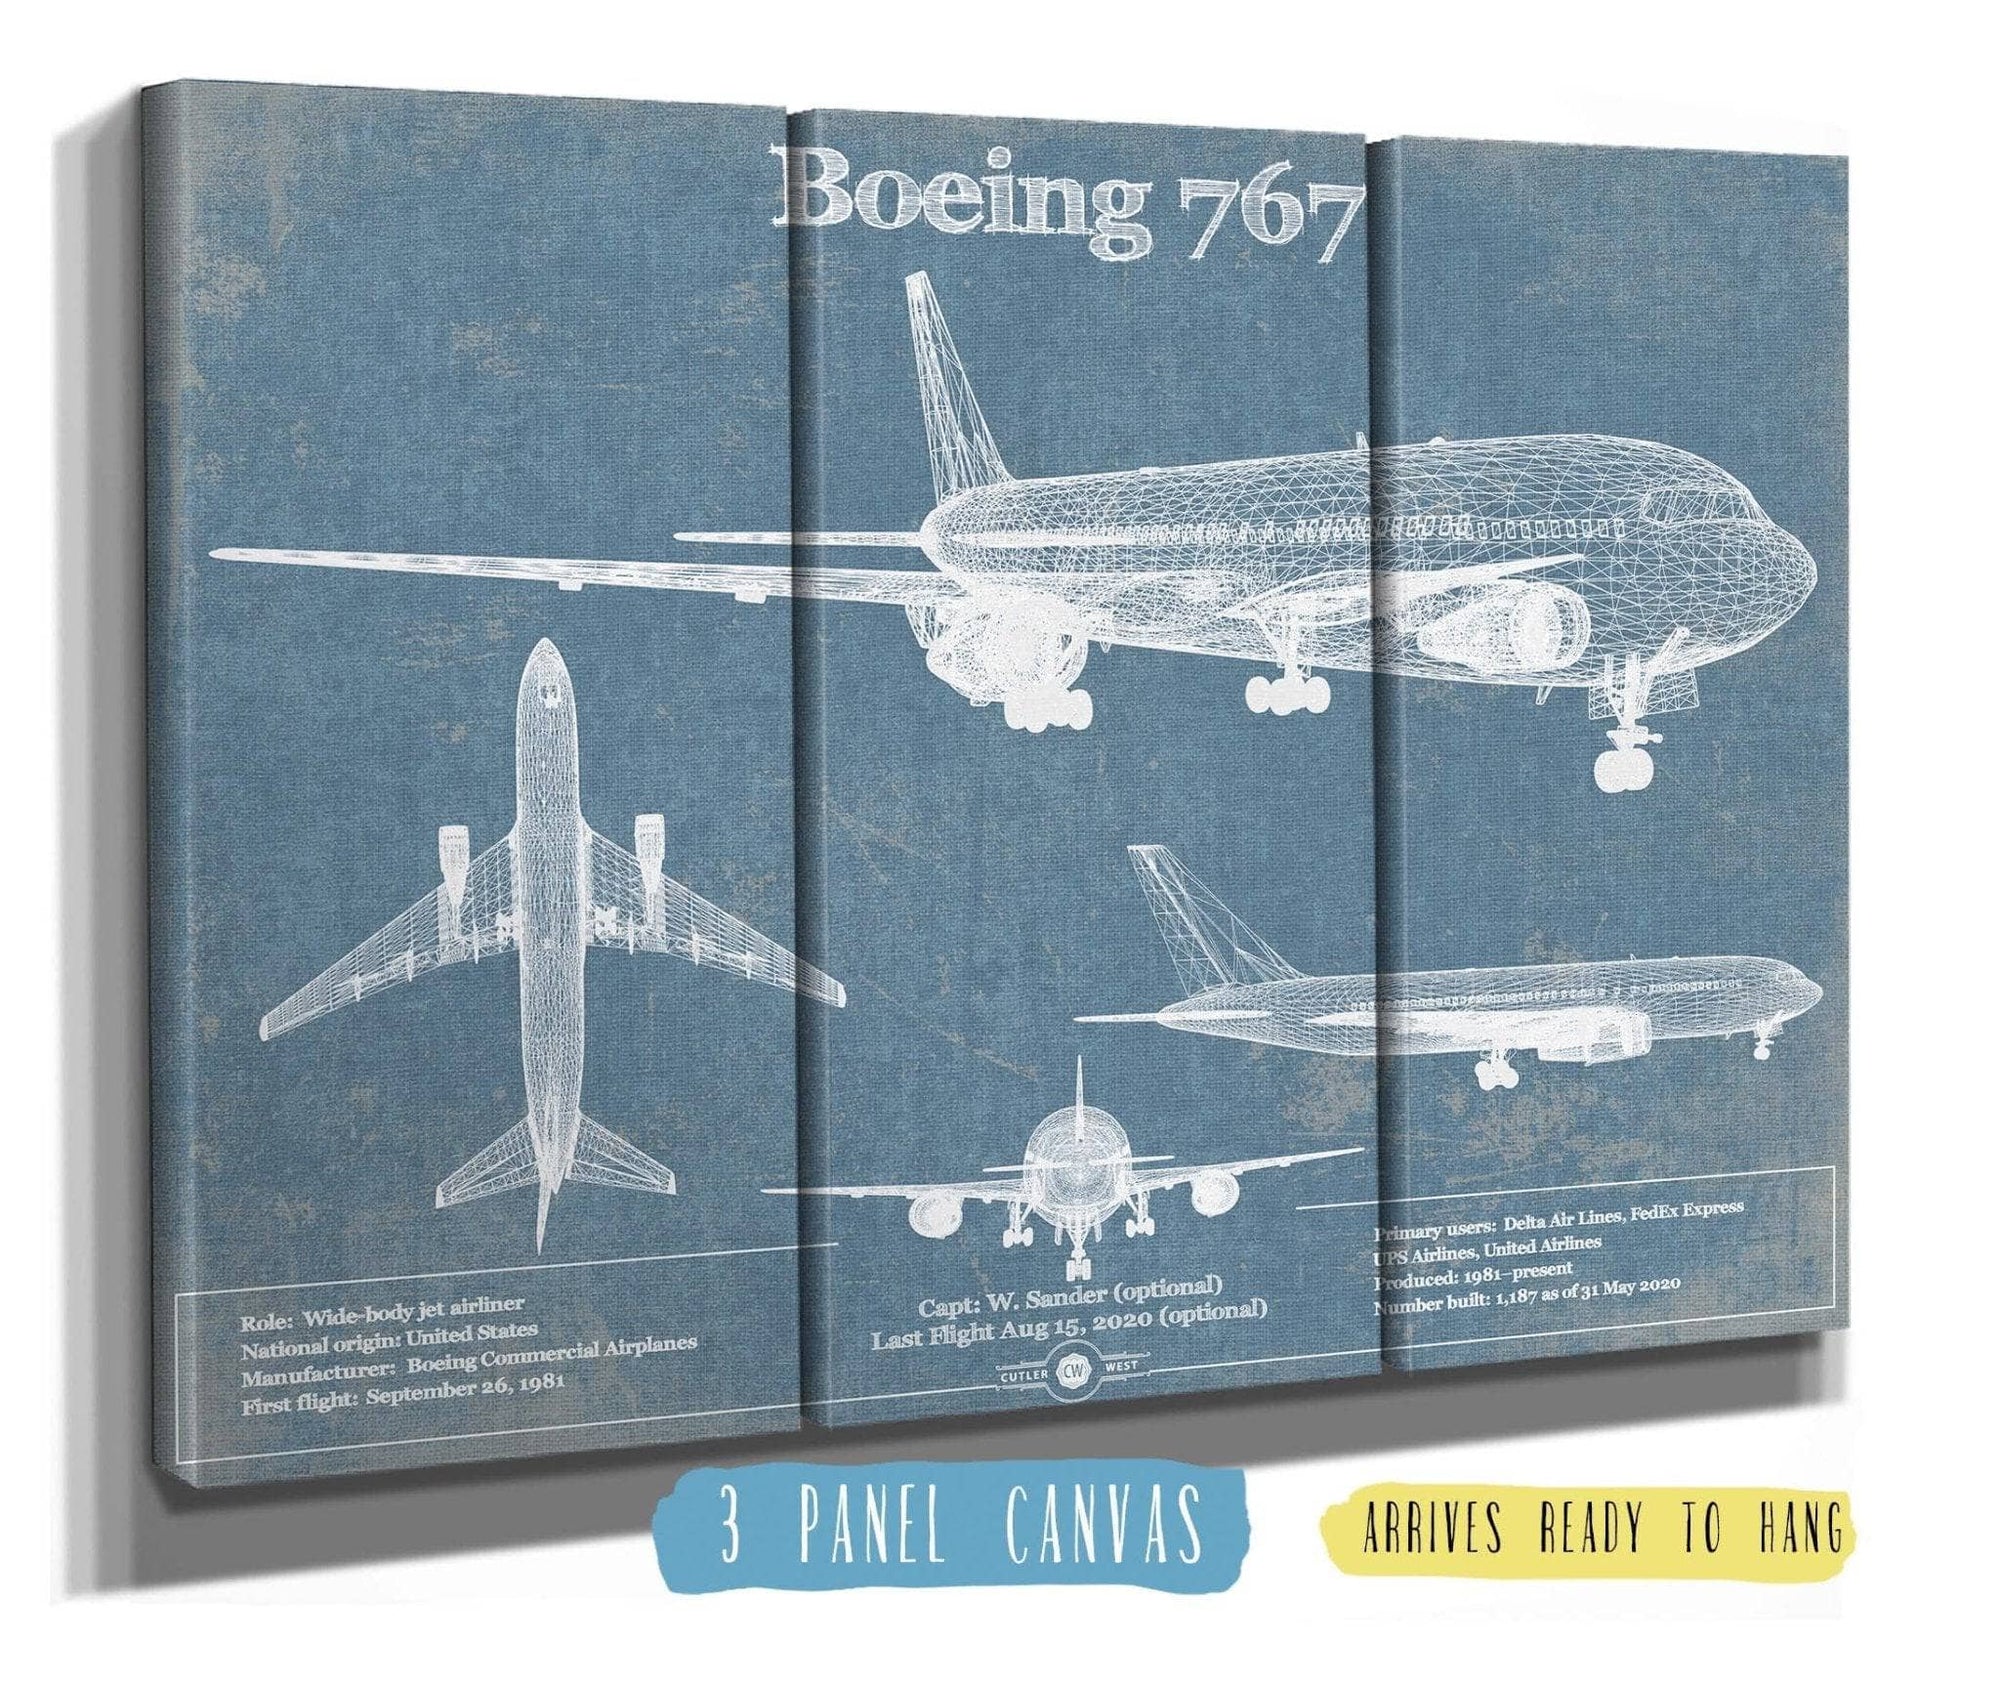 Cutler West Boeing Collection 48" x 32" / 3 Panel Canvas Wrap Boeing 767 Vintage Aviation Blueprint Print - Custom Pilot Name Can Be Added 835000103_51361